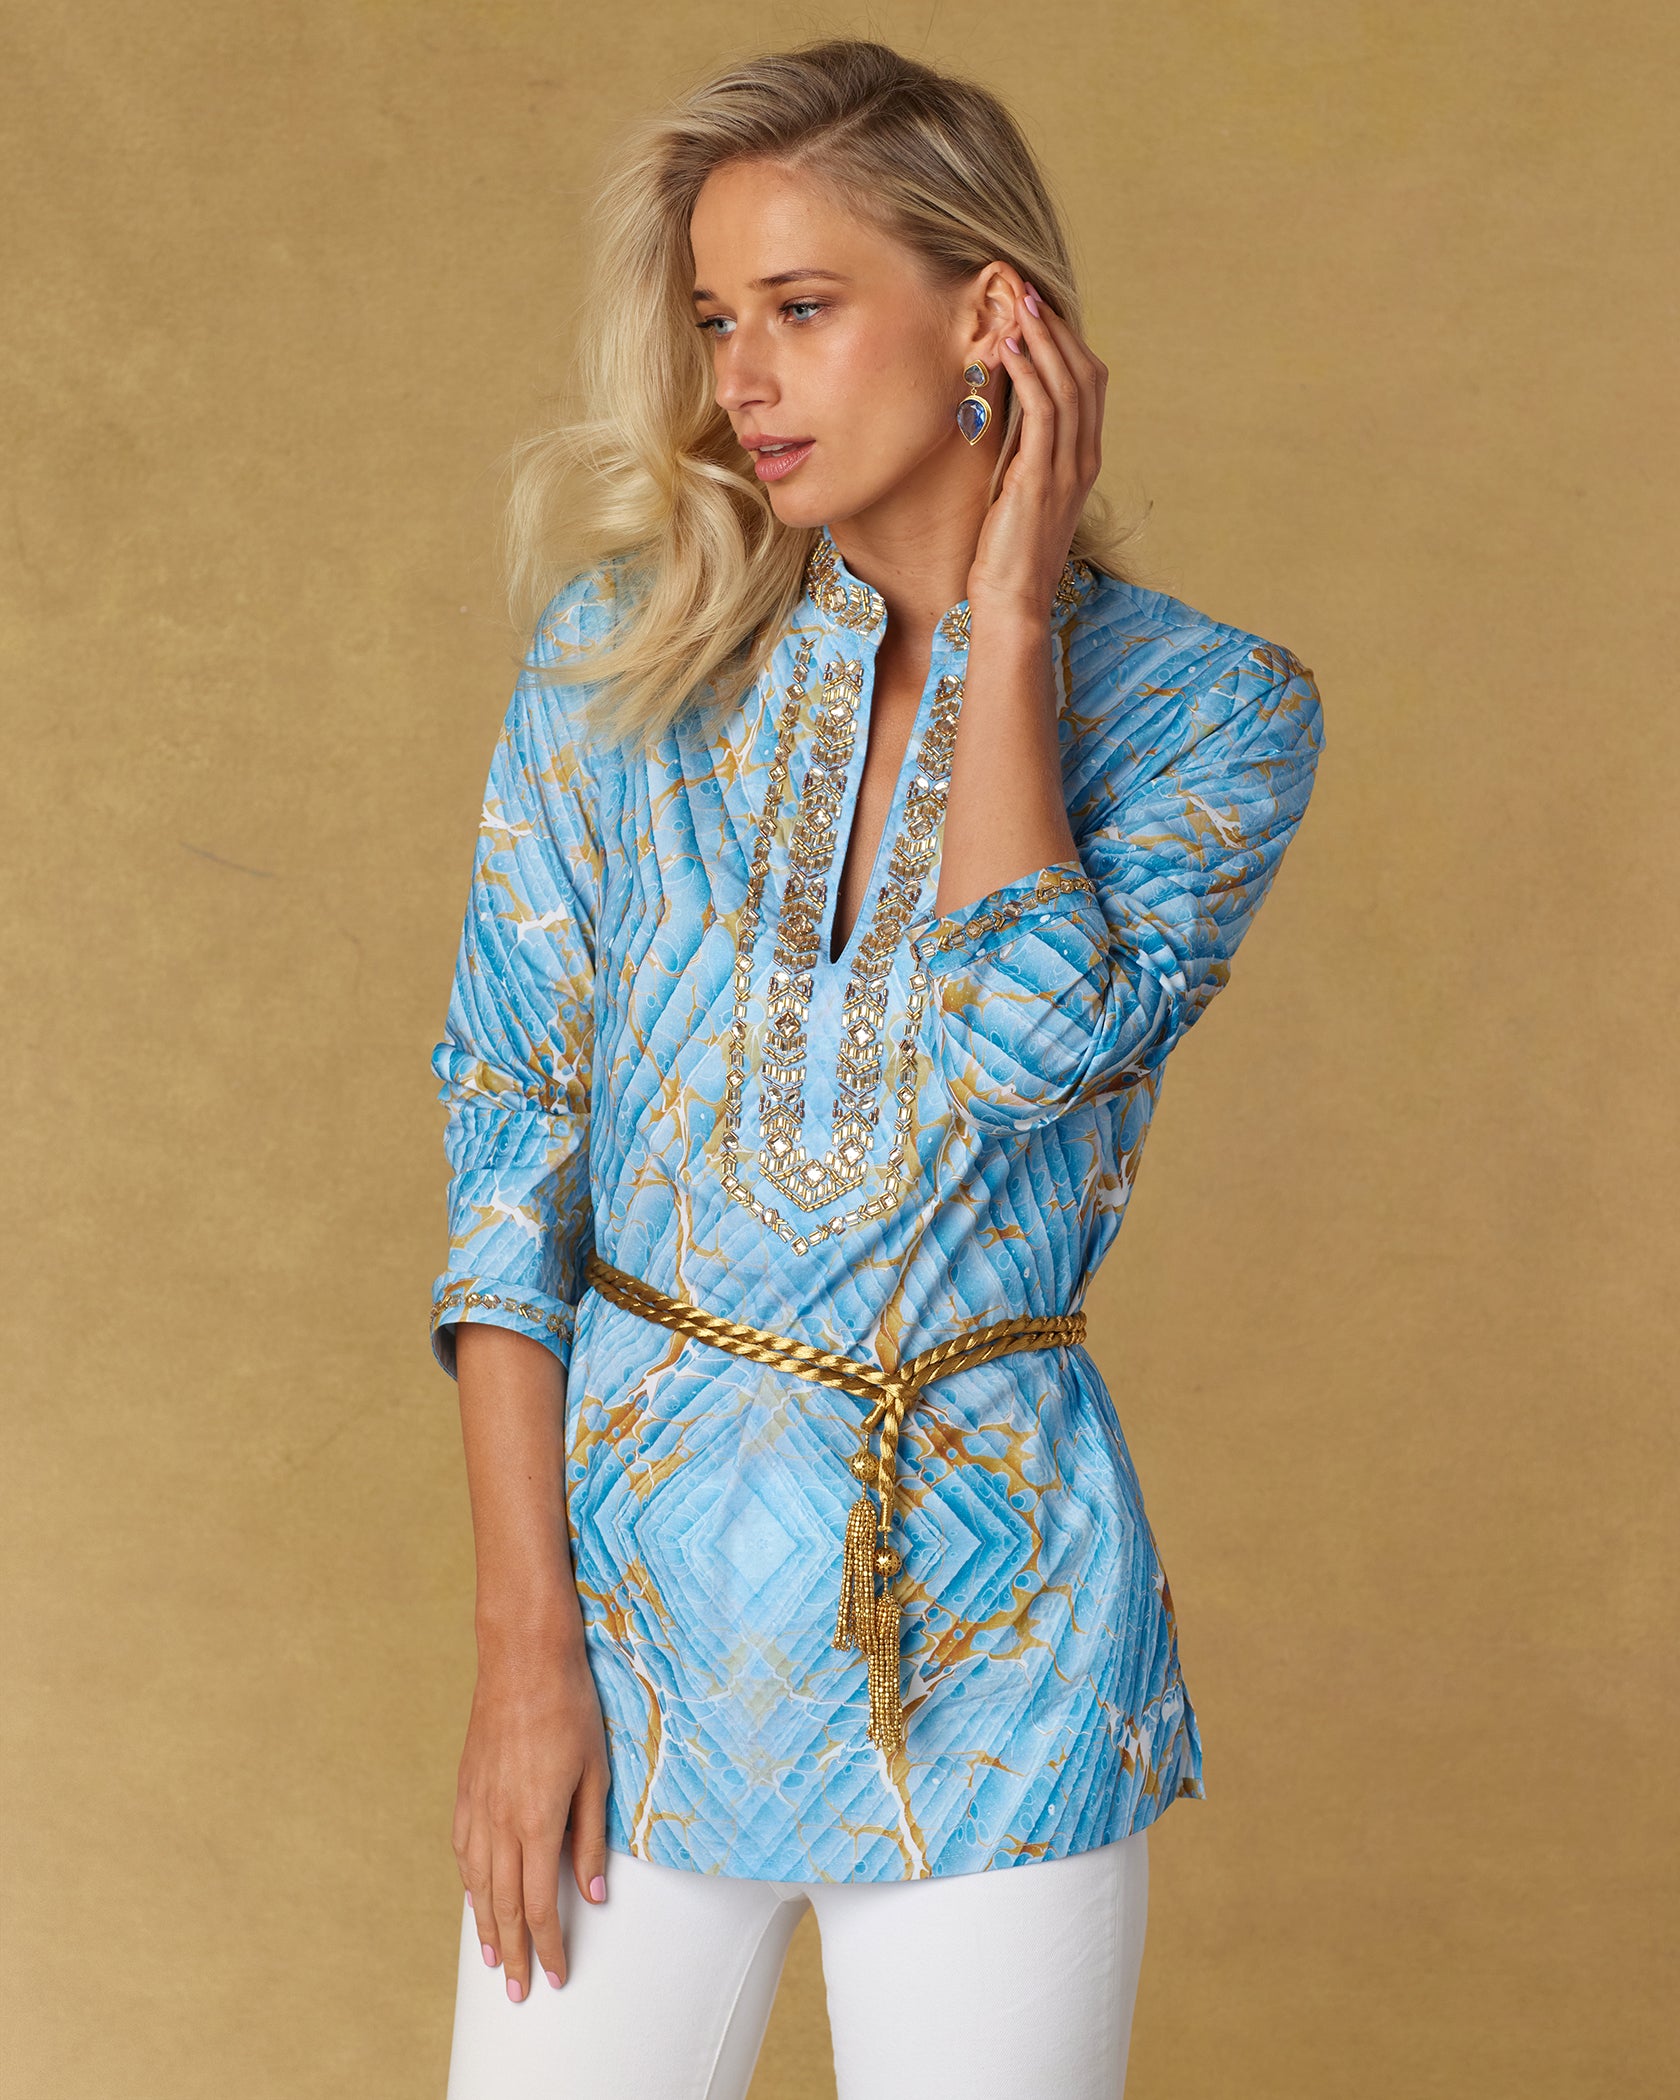 Estelle Tunic with Gold Embellishment in Sky Blue Marble-Worn with Artemis Gold Belt